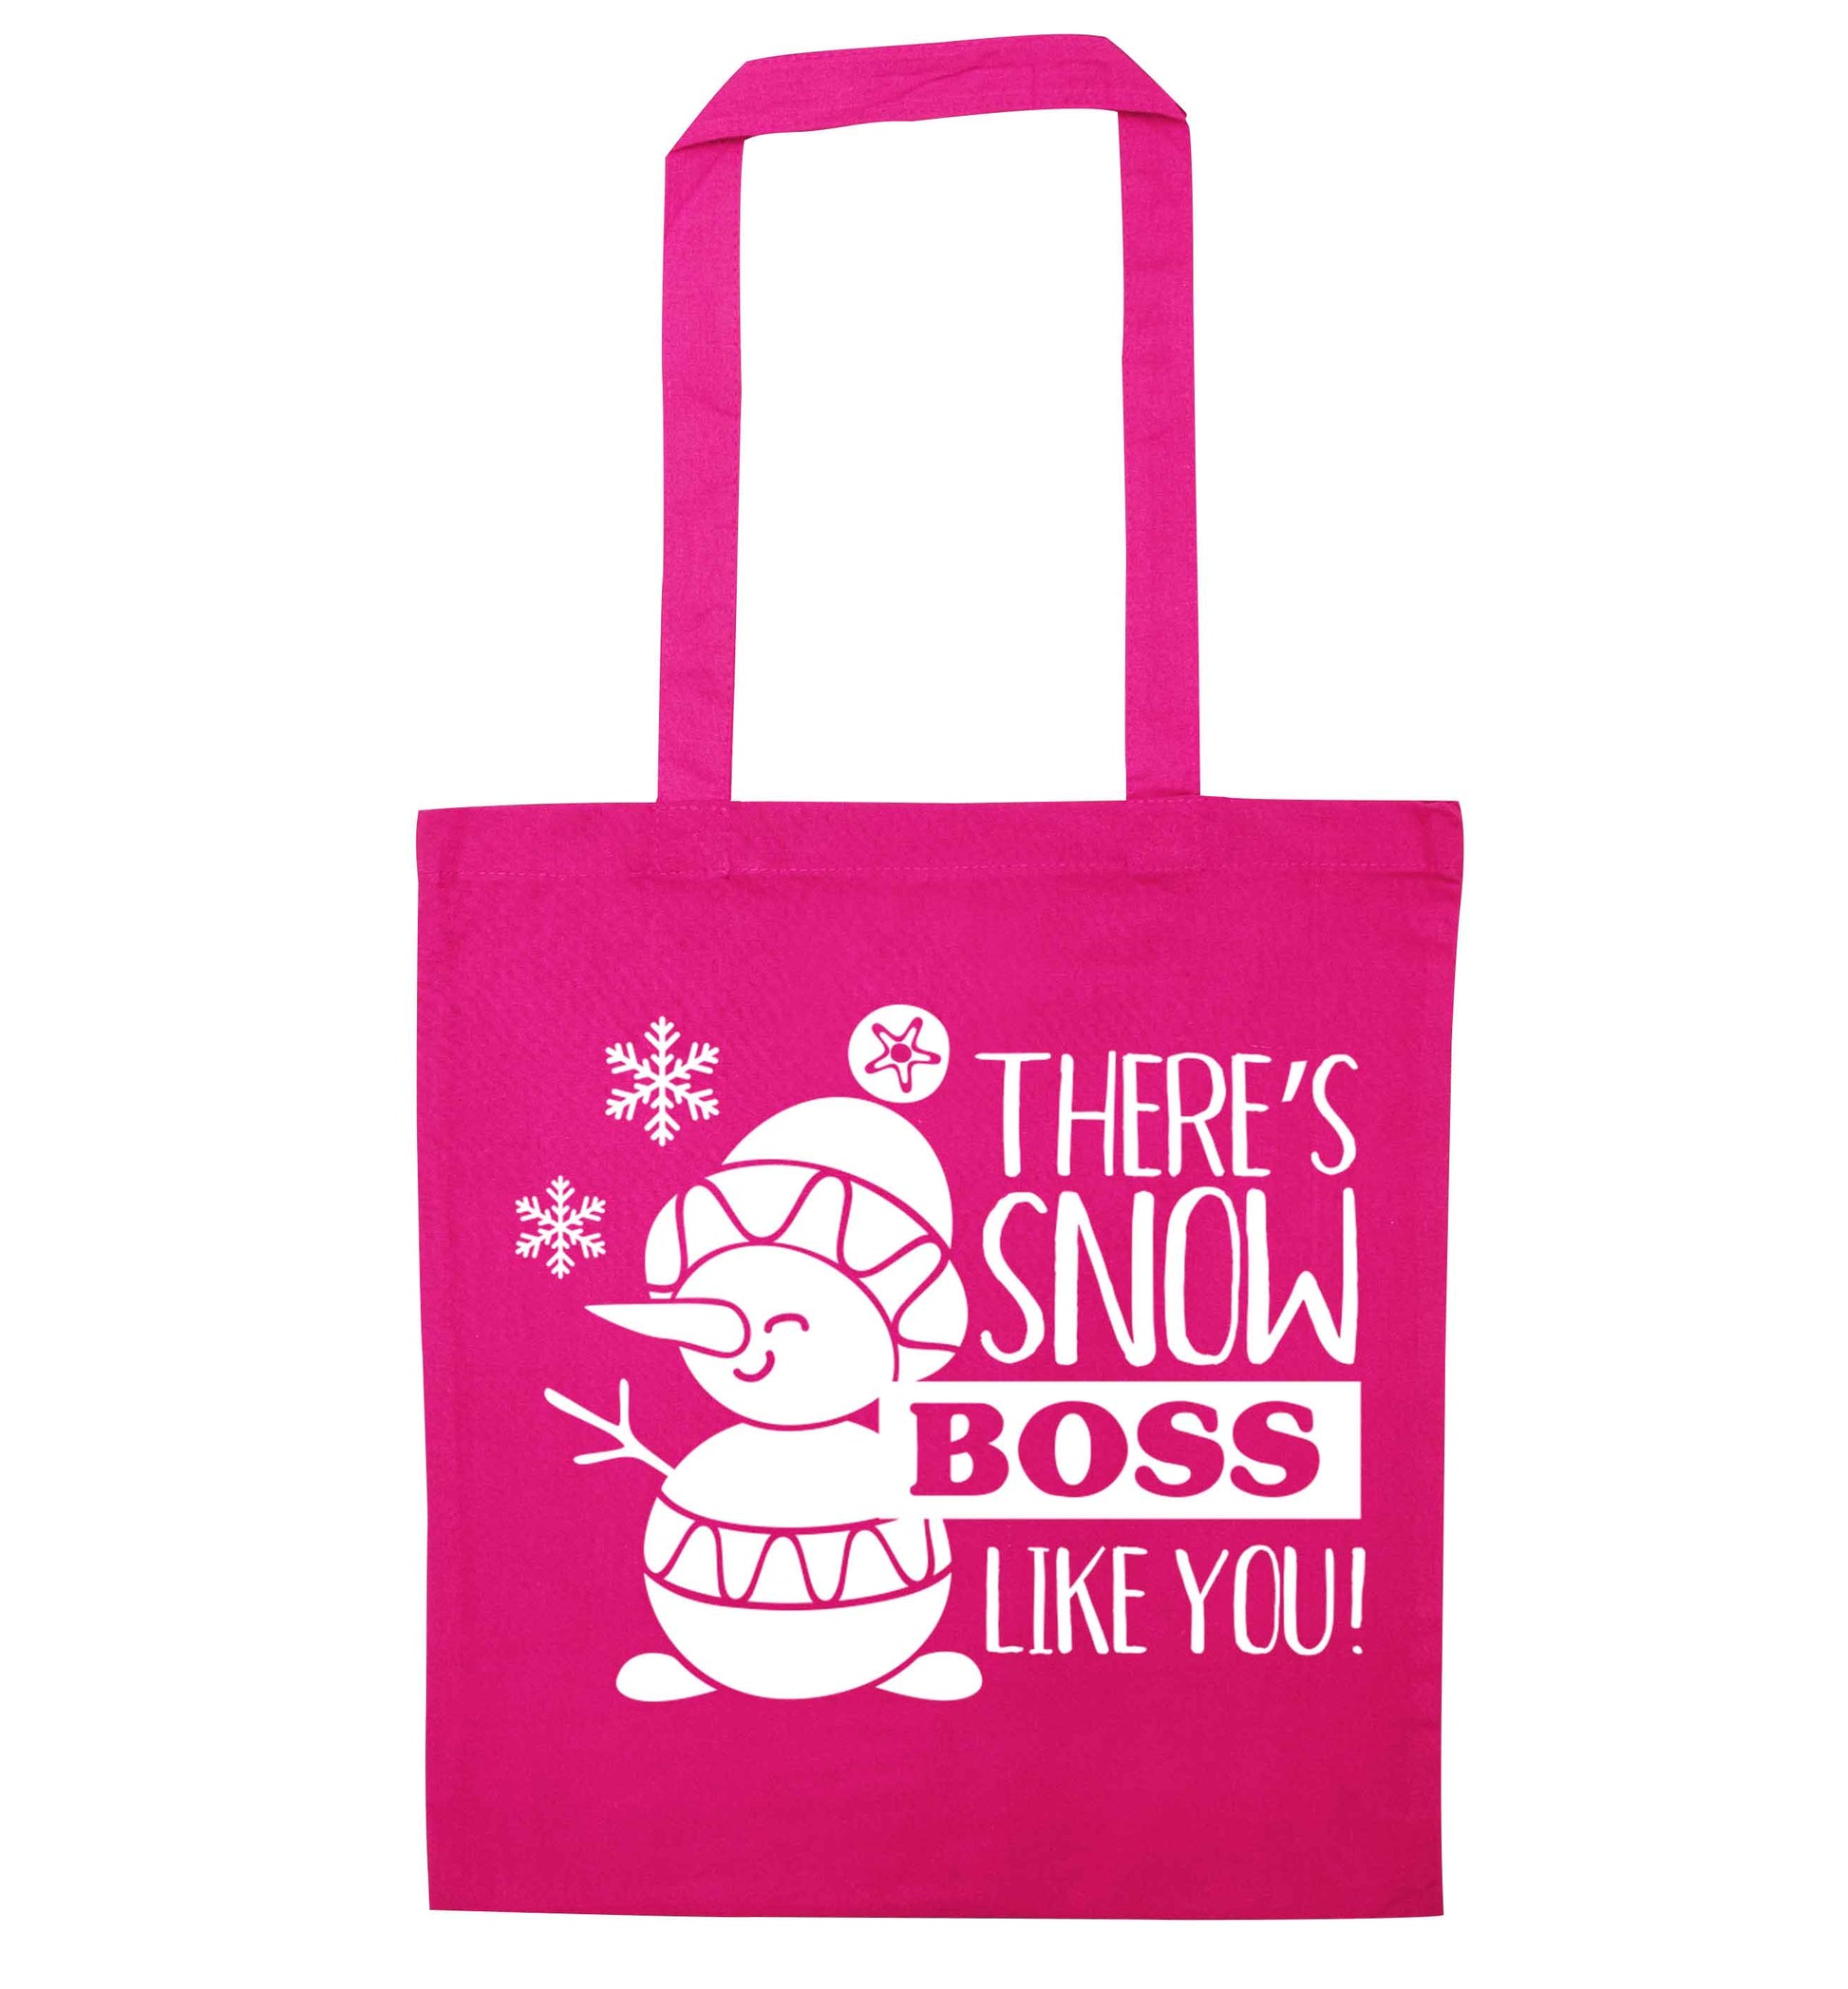 There's snow boss like you pink tote bag